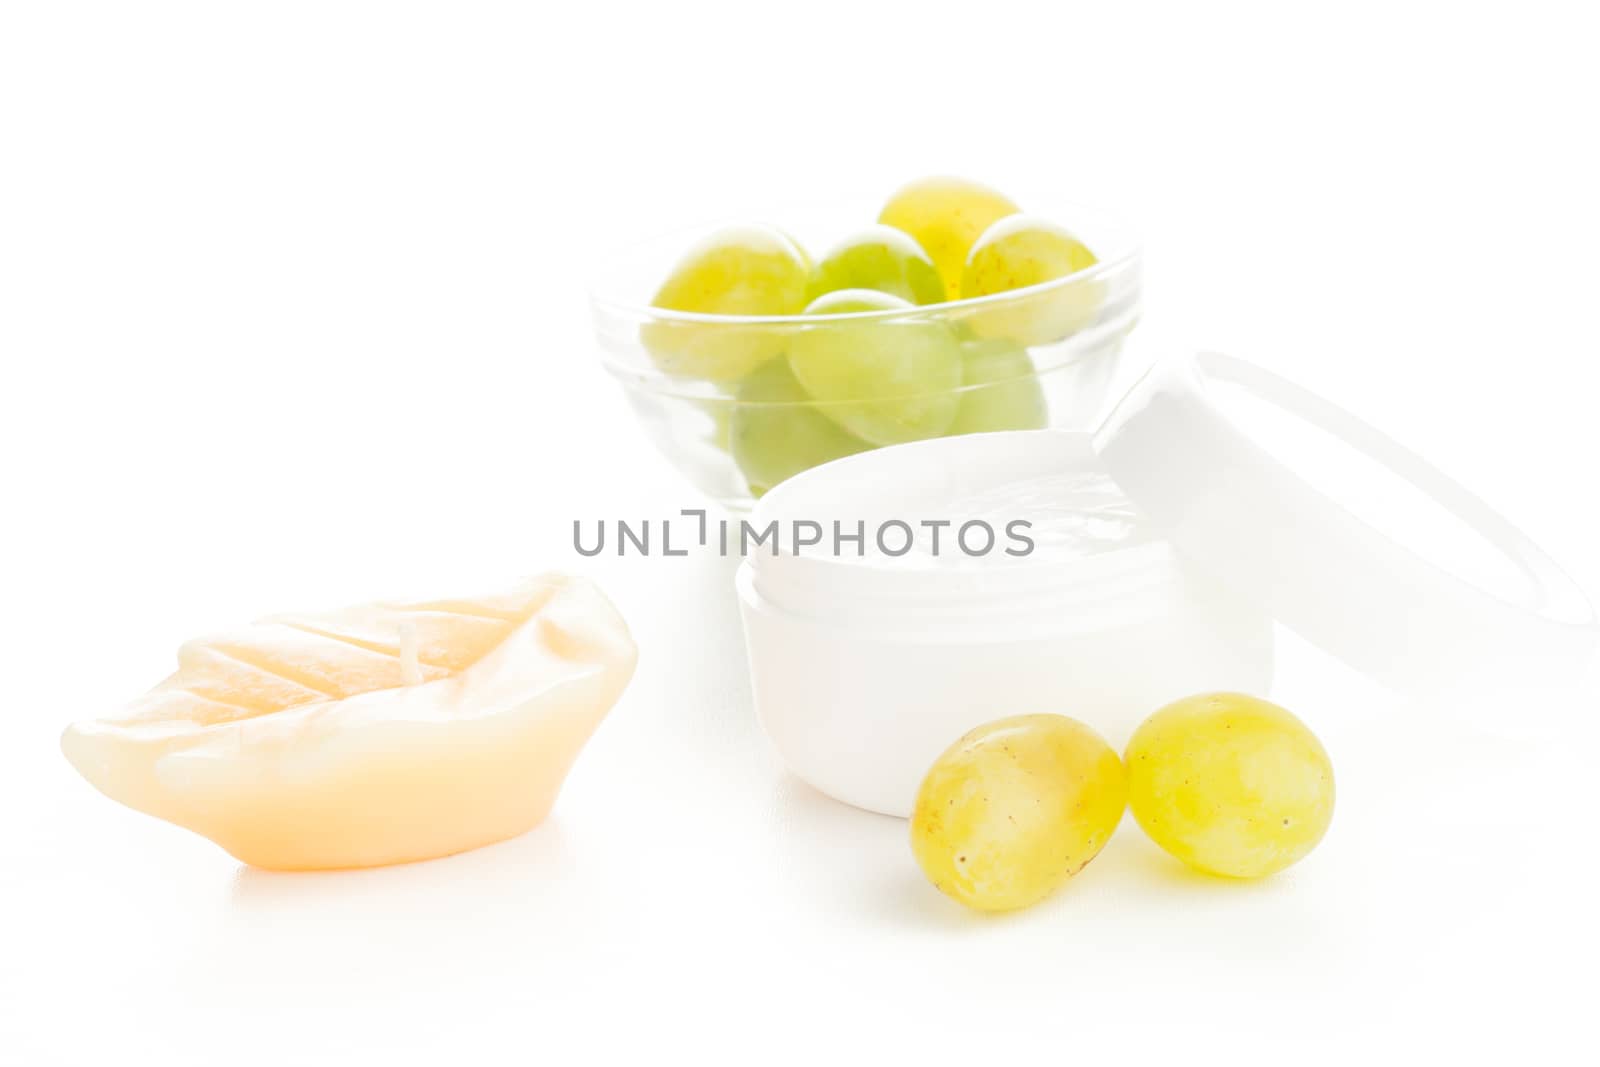 moisturizer cream with grapes by furo_felix